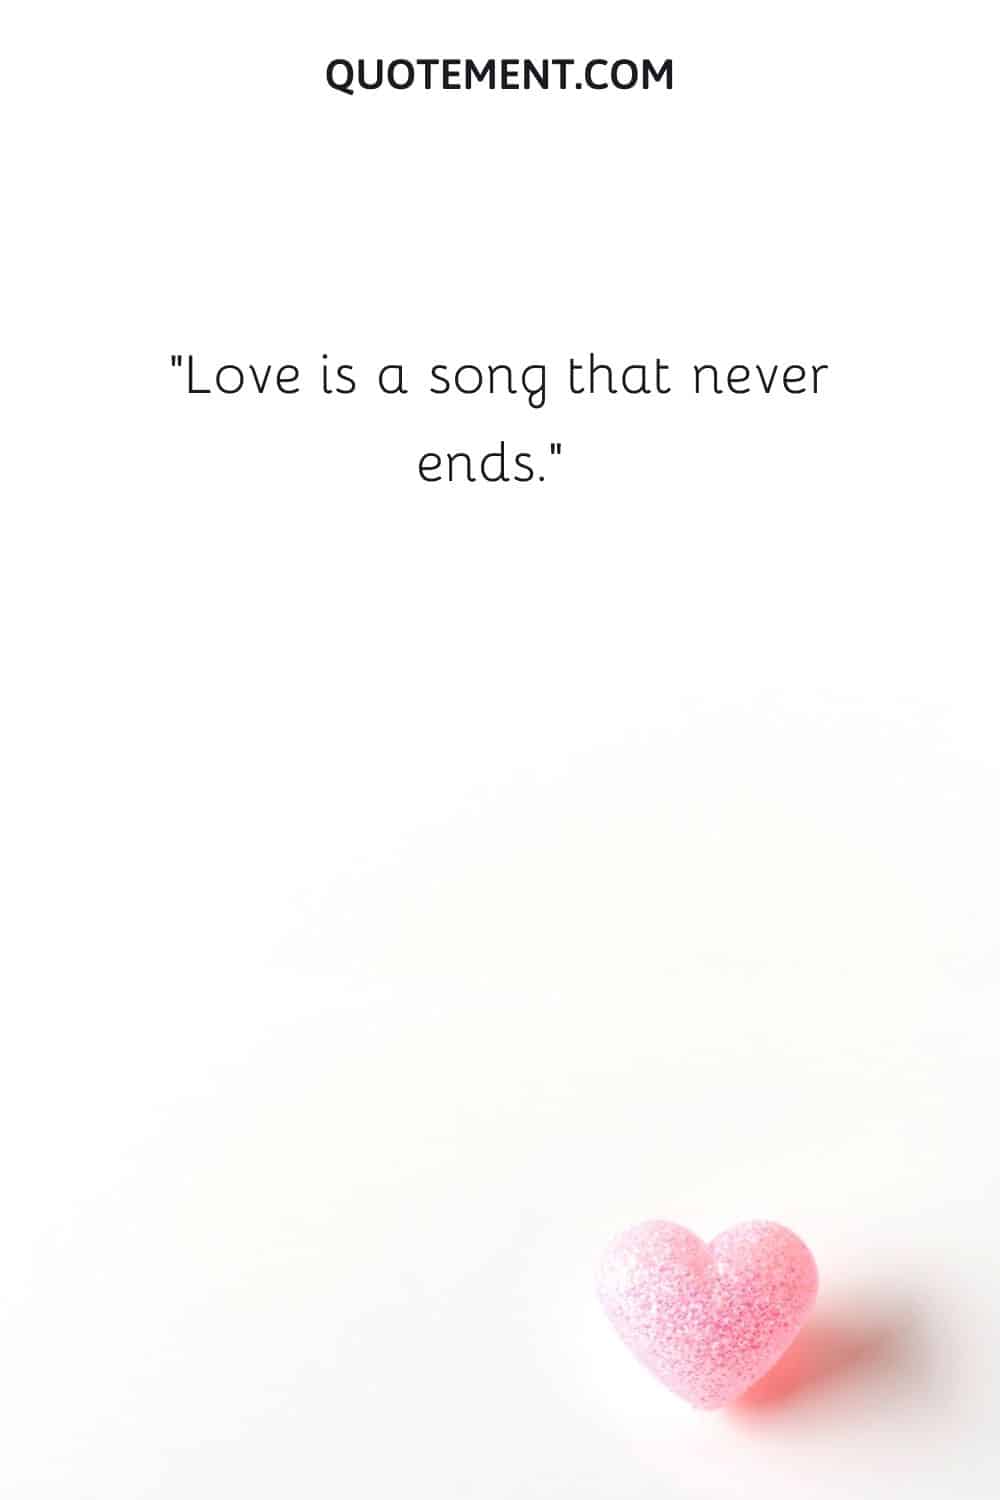 Love is a song that never ends.